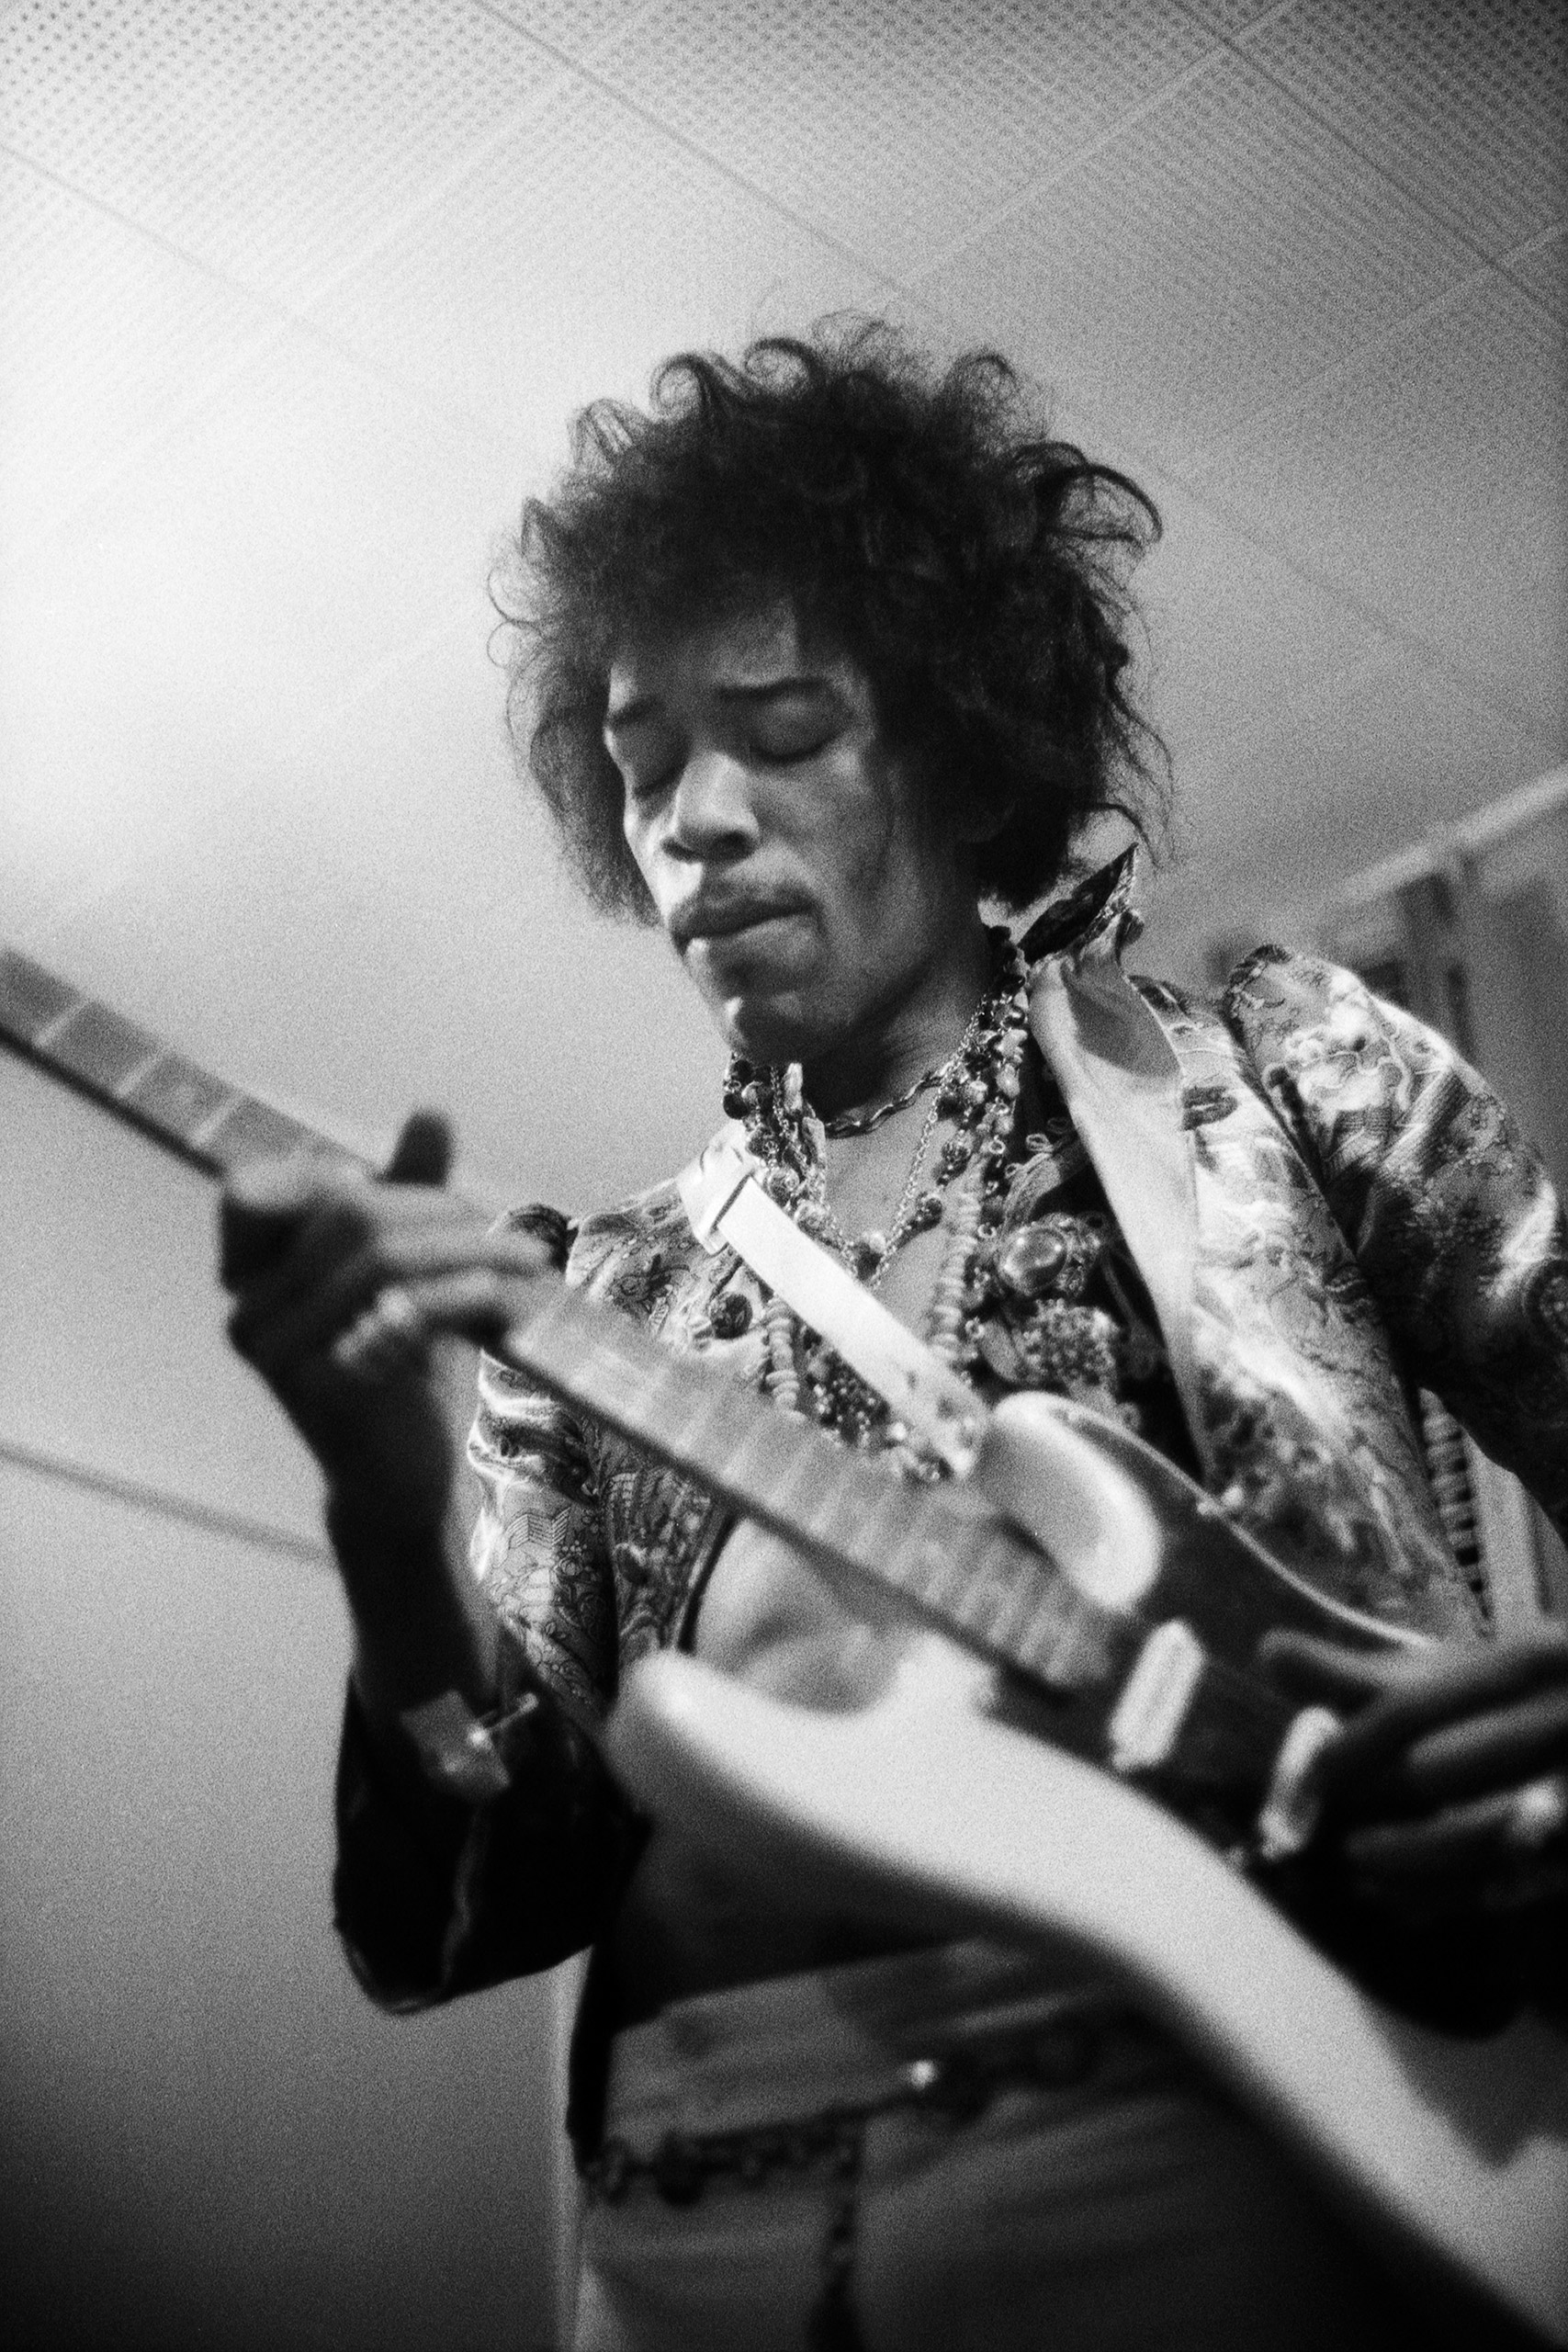 Jimi Hendrix plays his guitar in the dressing room before The Jimi Hendrix Experience performed at the Hollywood Bowl on Aug. 18, 1967.